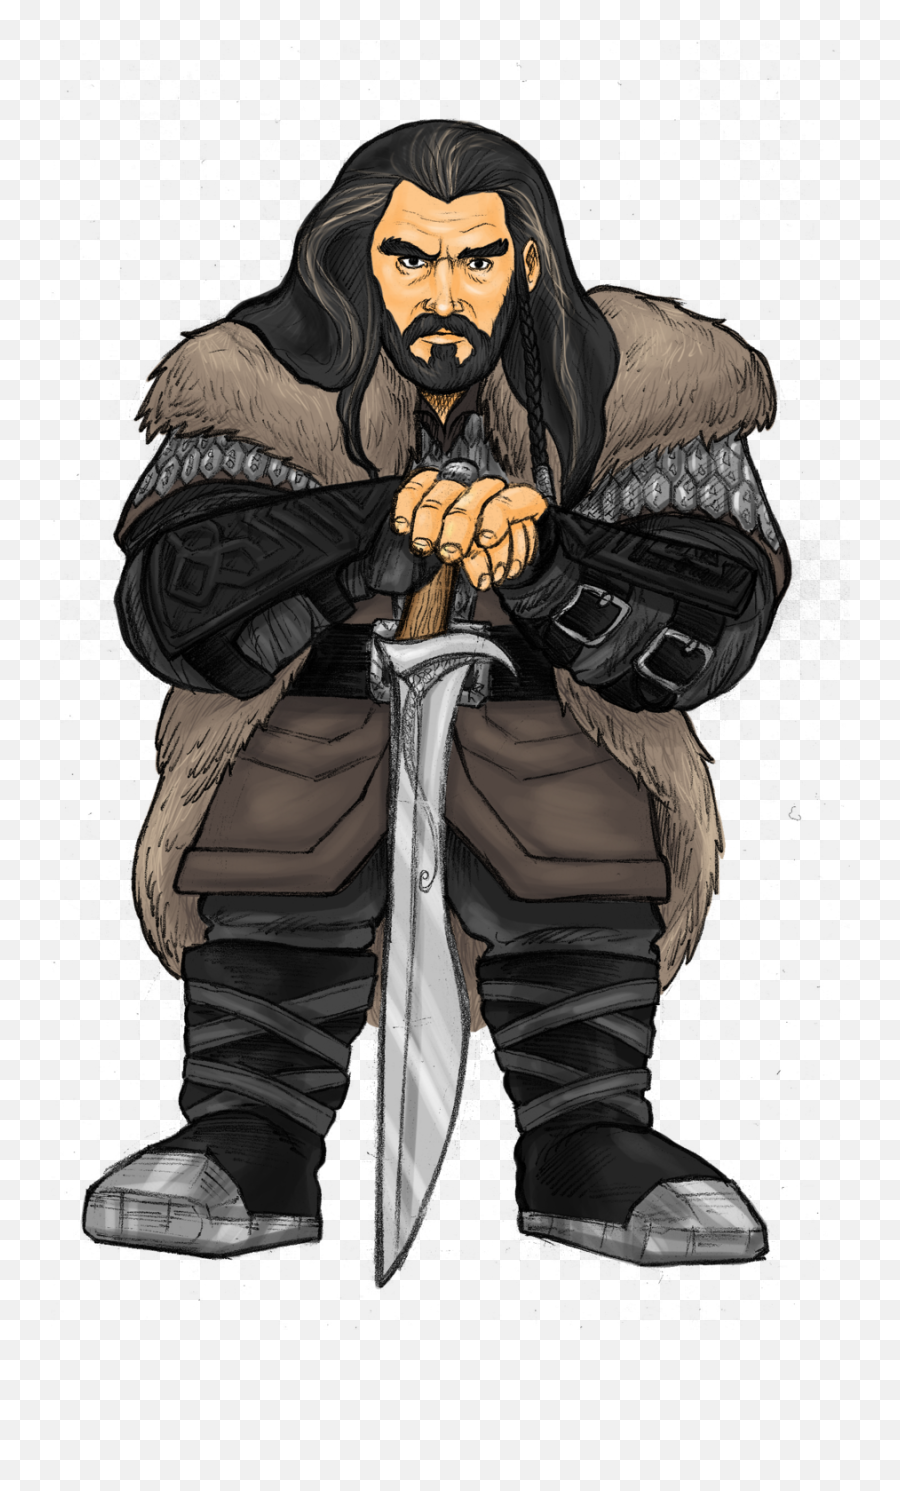 Thorin Oakenshield Fan Art - Yahoo Image Search Results Illustration Png,The Hobbit Png